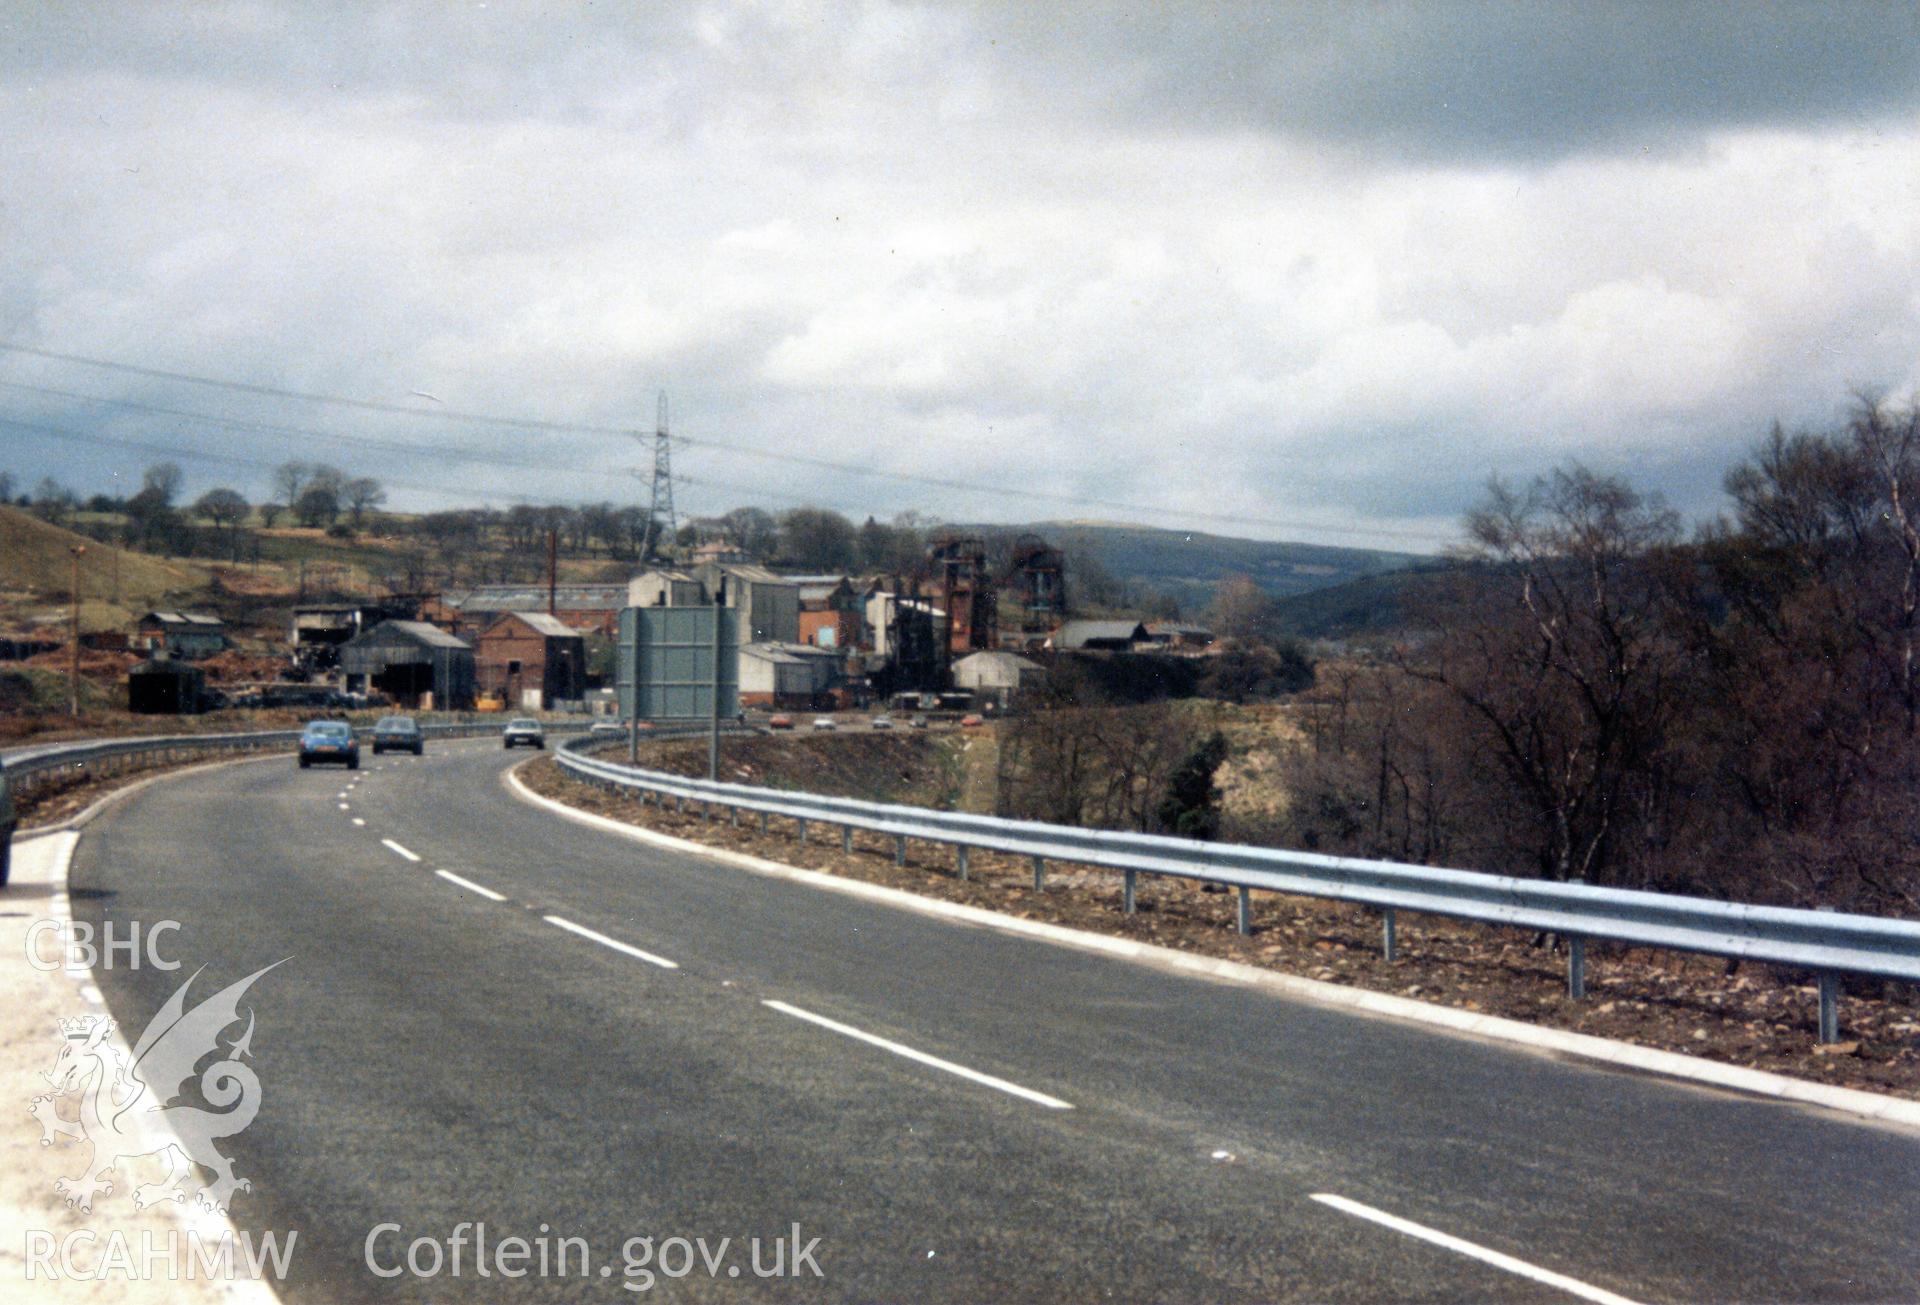 Digital photograph showing Markham colliery, dated 1985.